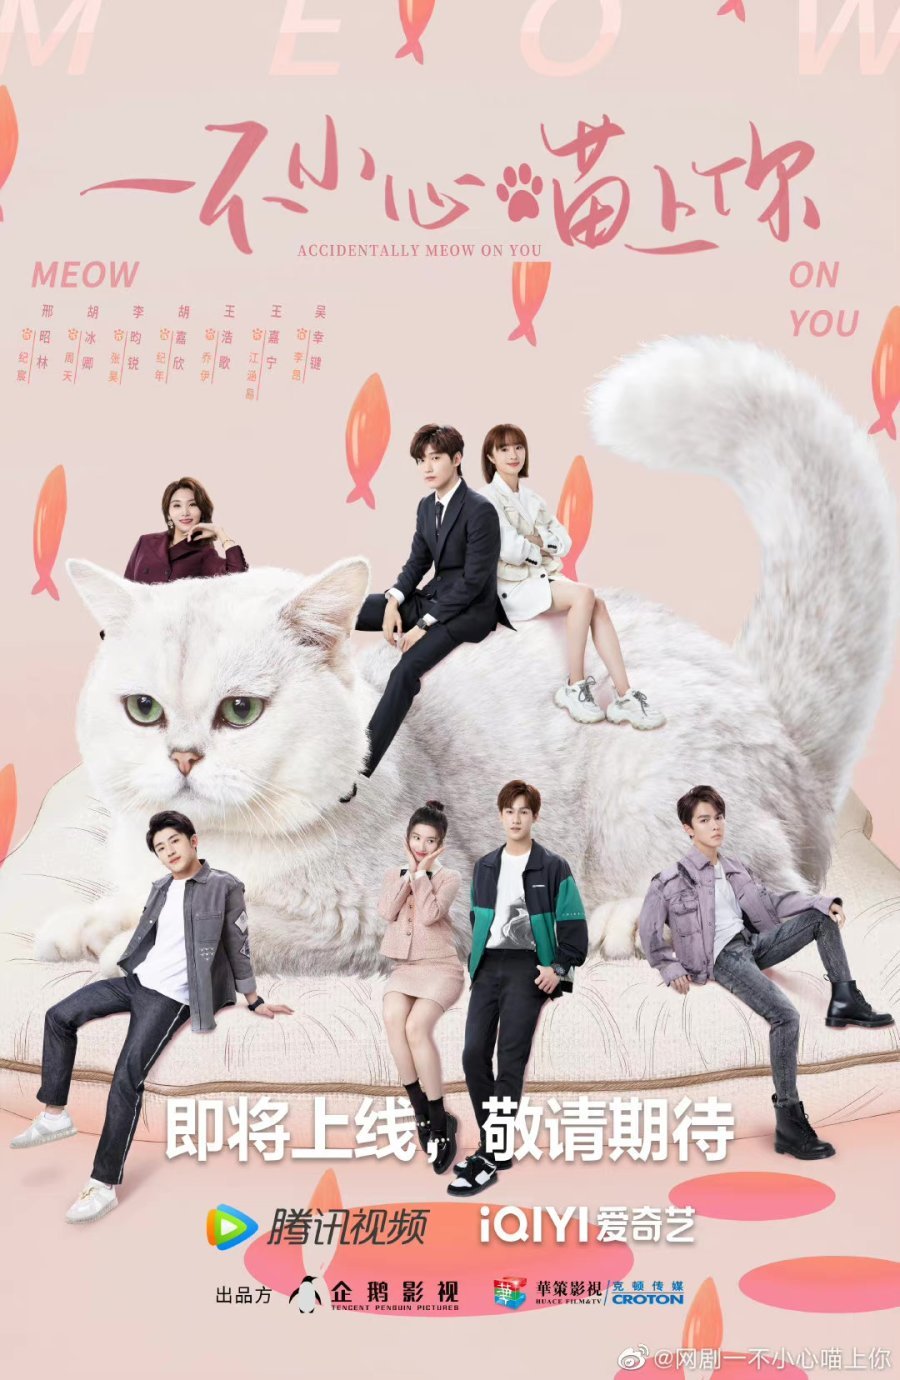 image poster from imdb, mydramalist - ​Accidentally Meow on You (2022)